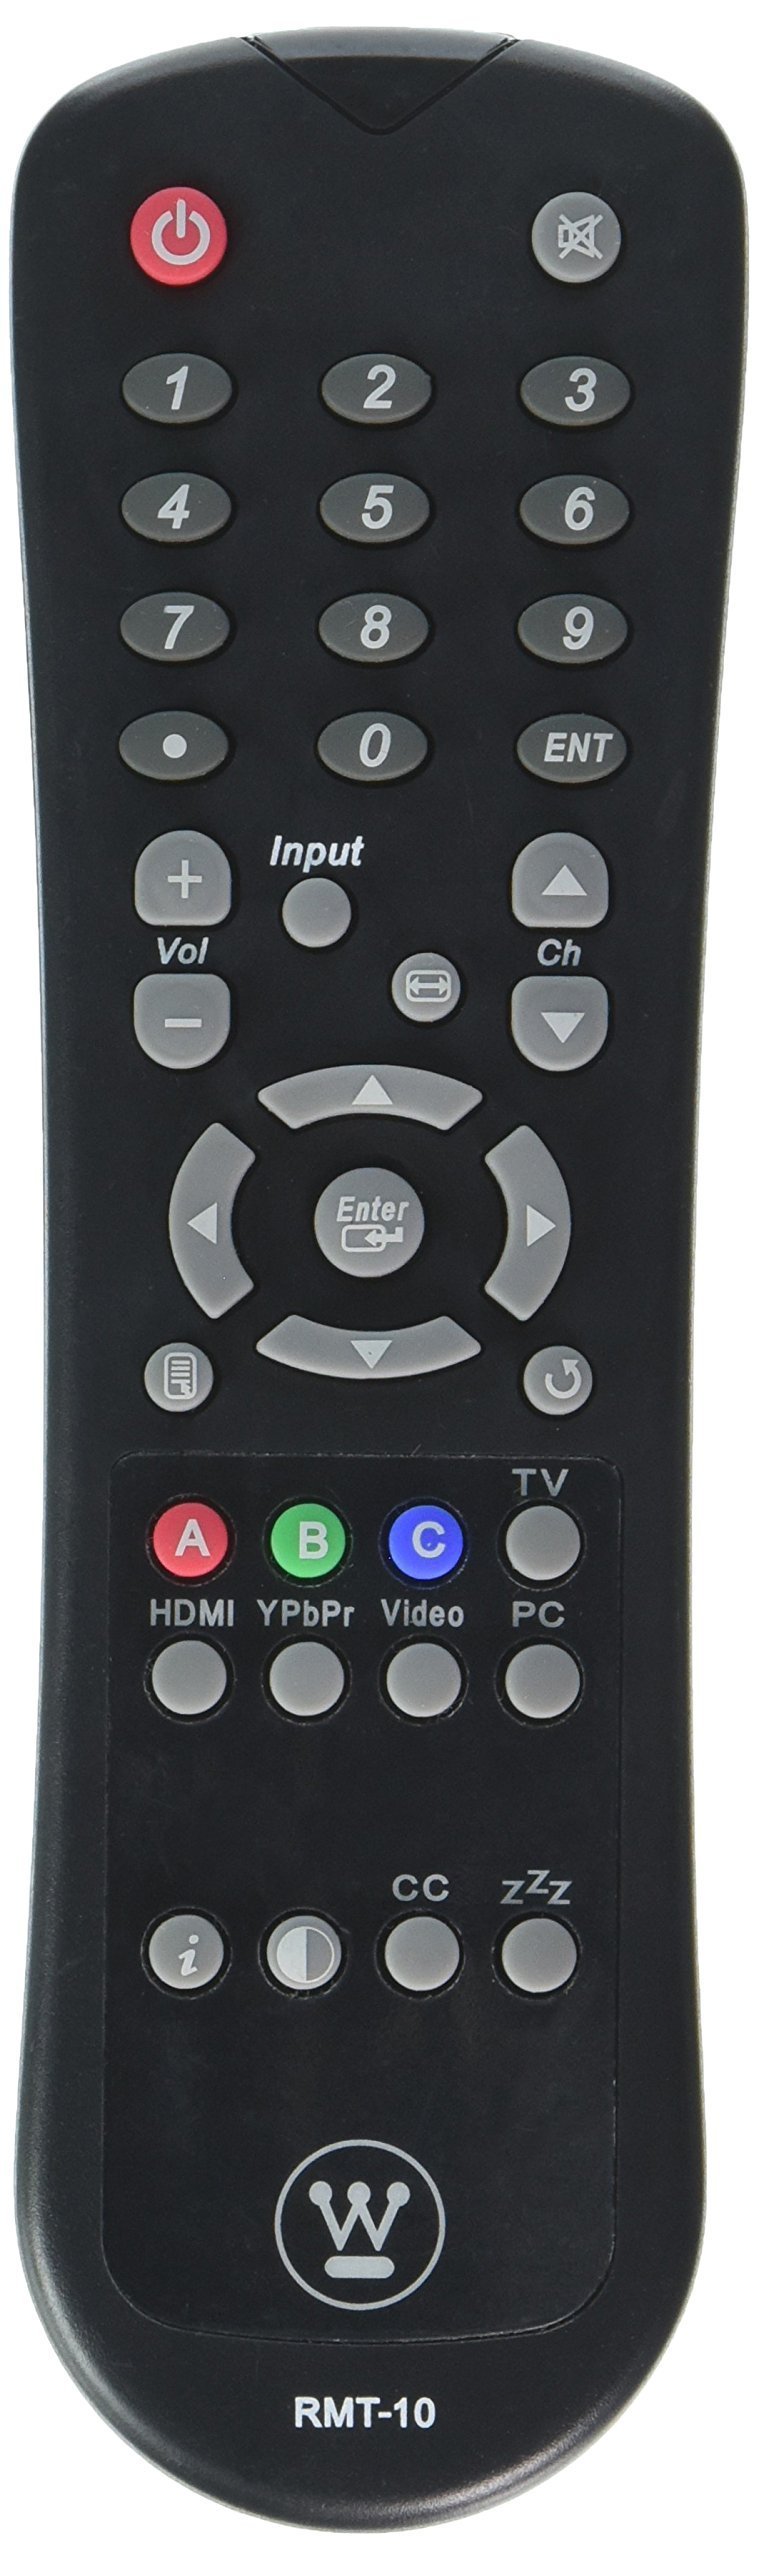 Westinghouse Digital LCD TV Remote Control RMT-10 Supplied with models: SK-26H640G SK-26H730S